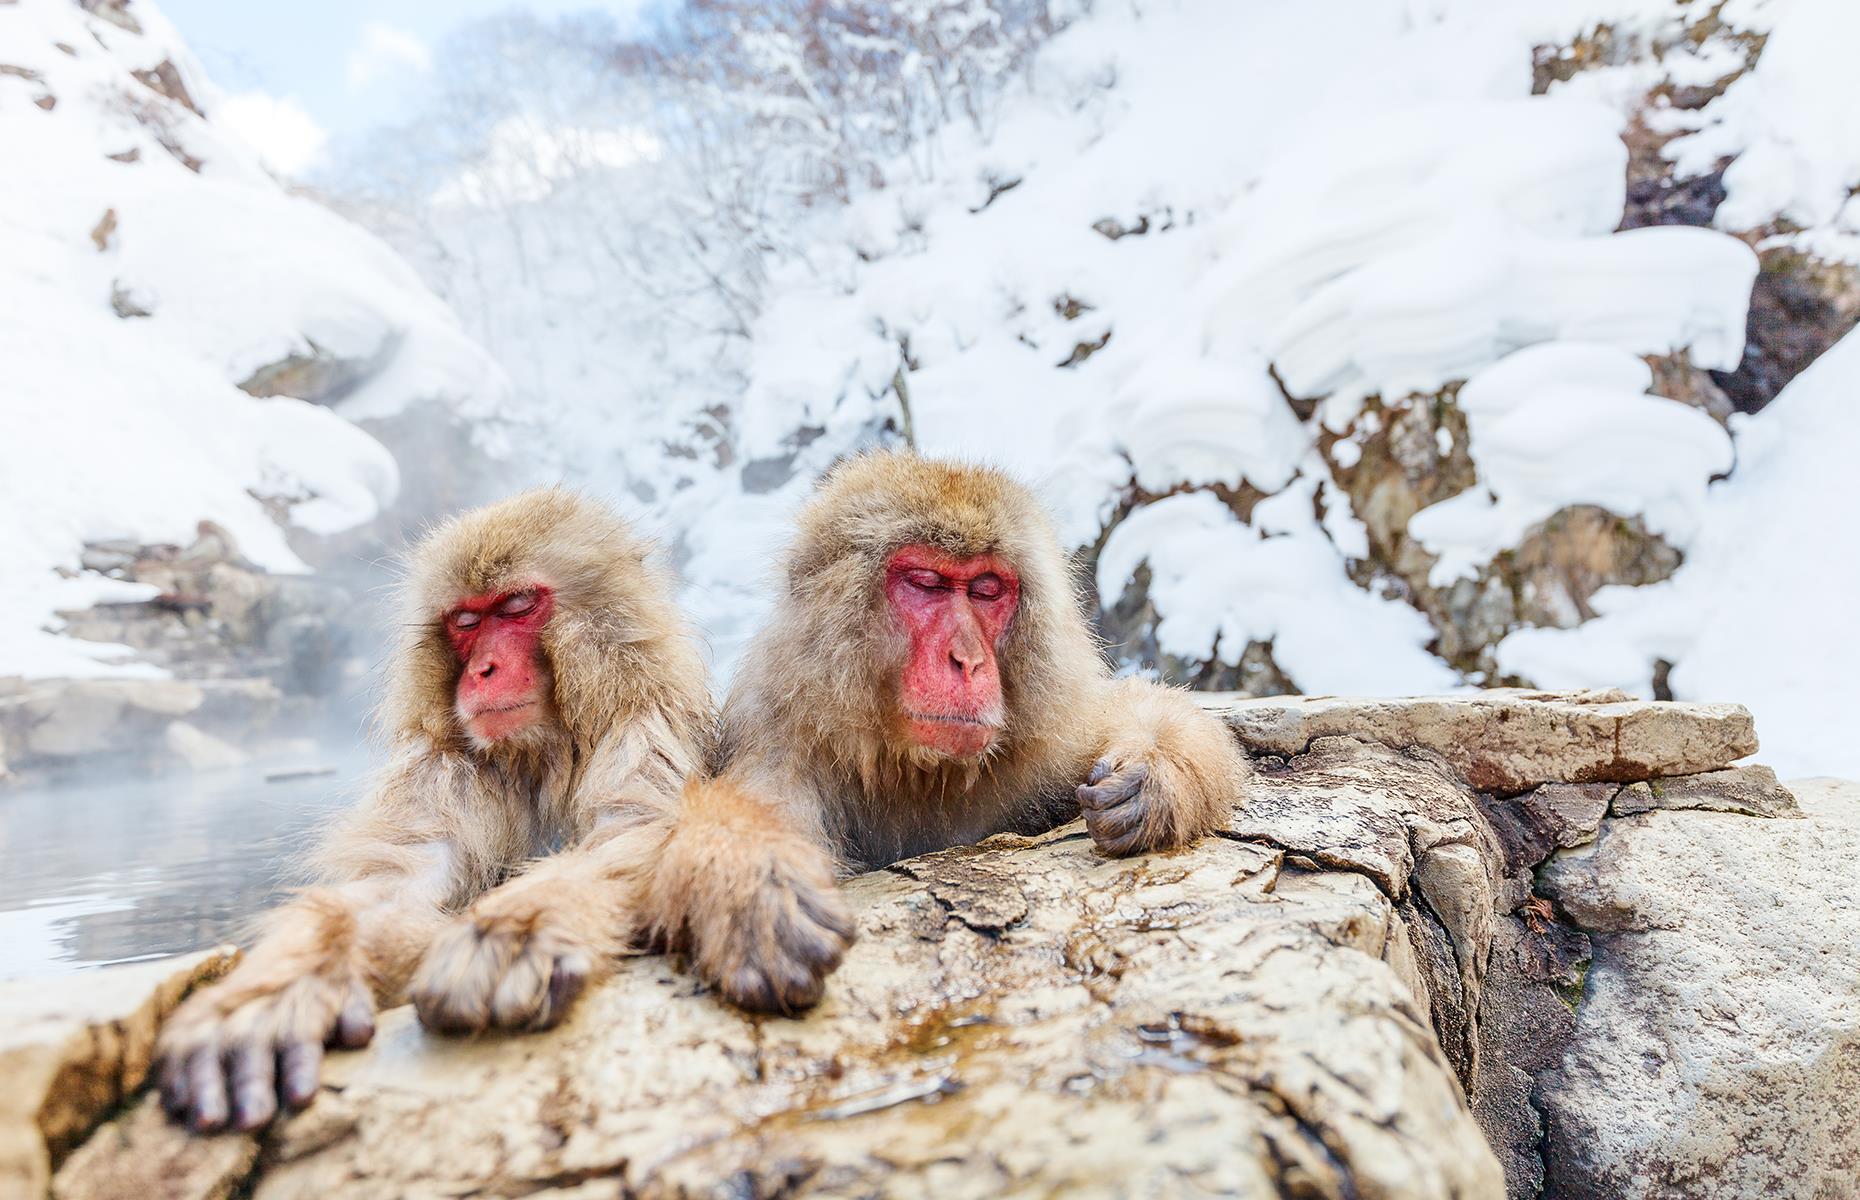 <p>If you're planning a visit to Tokyo – which has finally reopened after the COVID-19 pandemic – make time for the 90-minute train trip north of the Japanese capital to Jigokudani Monkey Park. Although the snow monkeys, or Japanese macaques, probably won't be bathing in the onsen until the weather gets cold, there will still be plenty of animals to spot at other times of the year to make the journey worthwhile.</p>  <p><strong><a href="https://www.loveexploring.com/galleries/159653/21-of-japans-best-train-journeys?page=1">These are the best train journeys in Japan</a></strong></p>